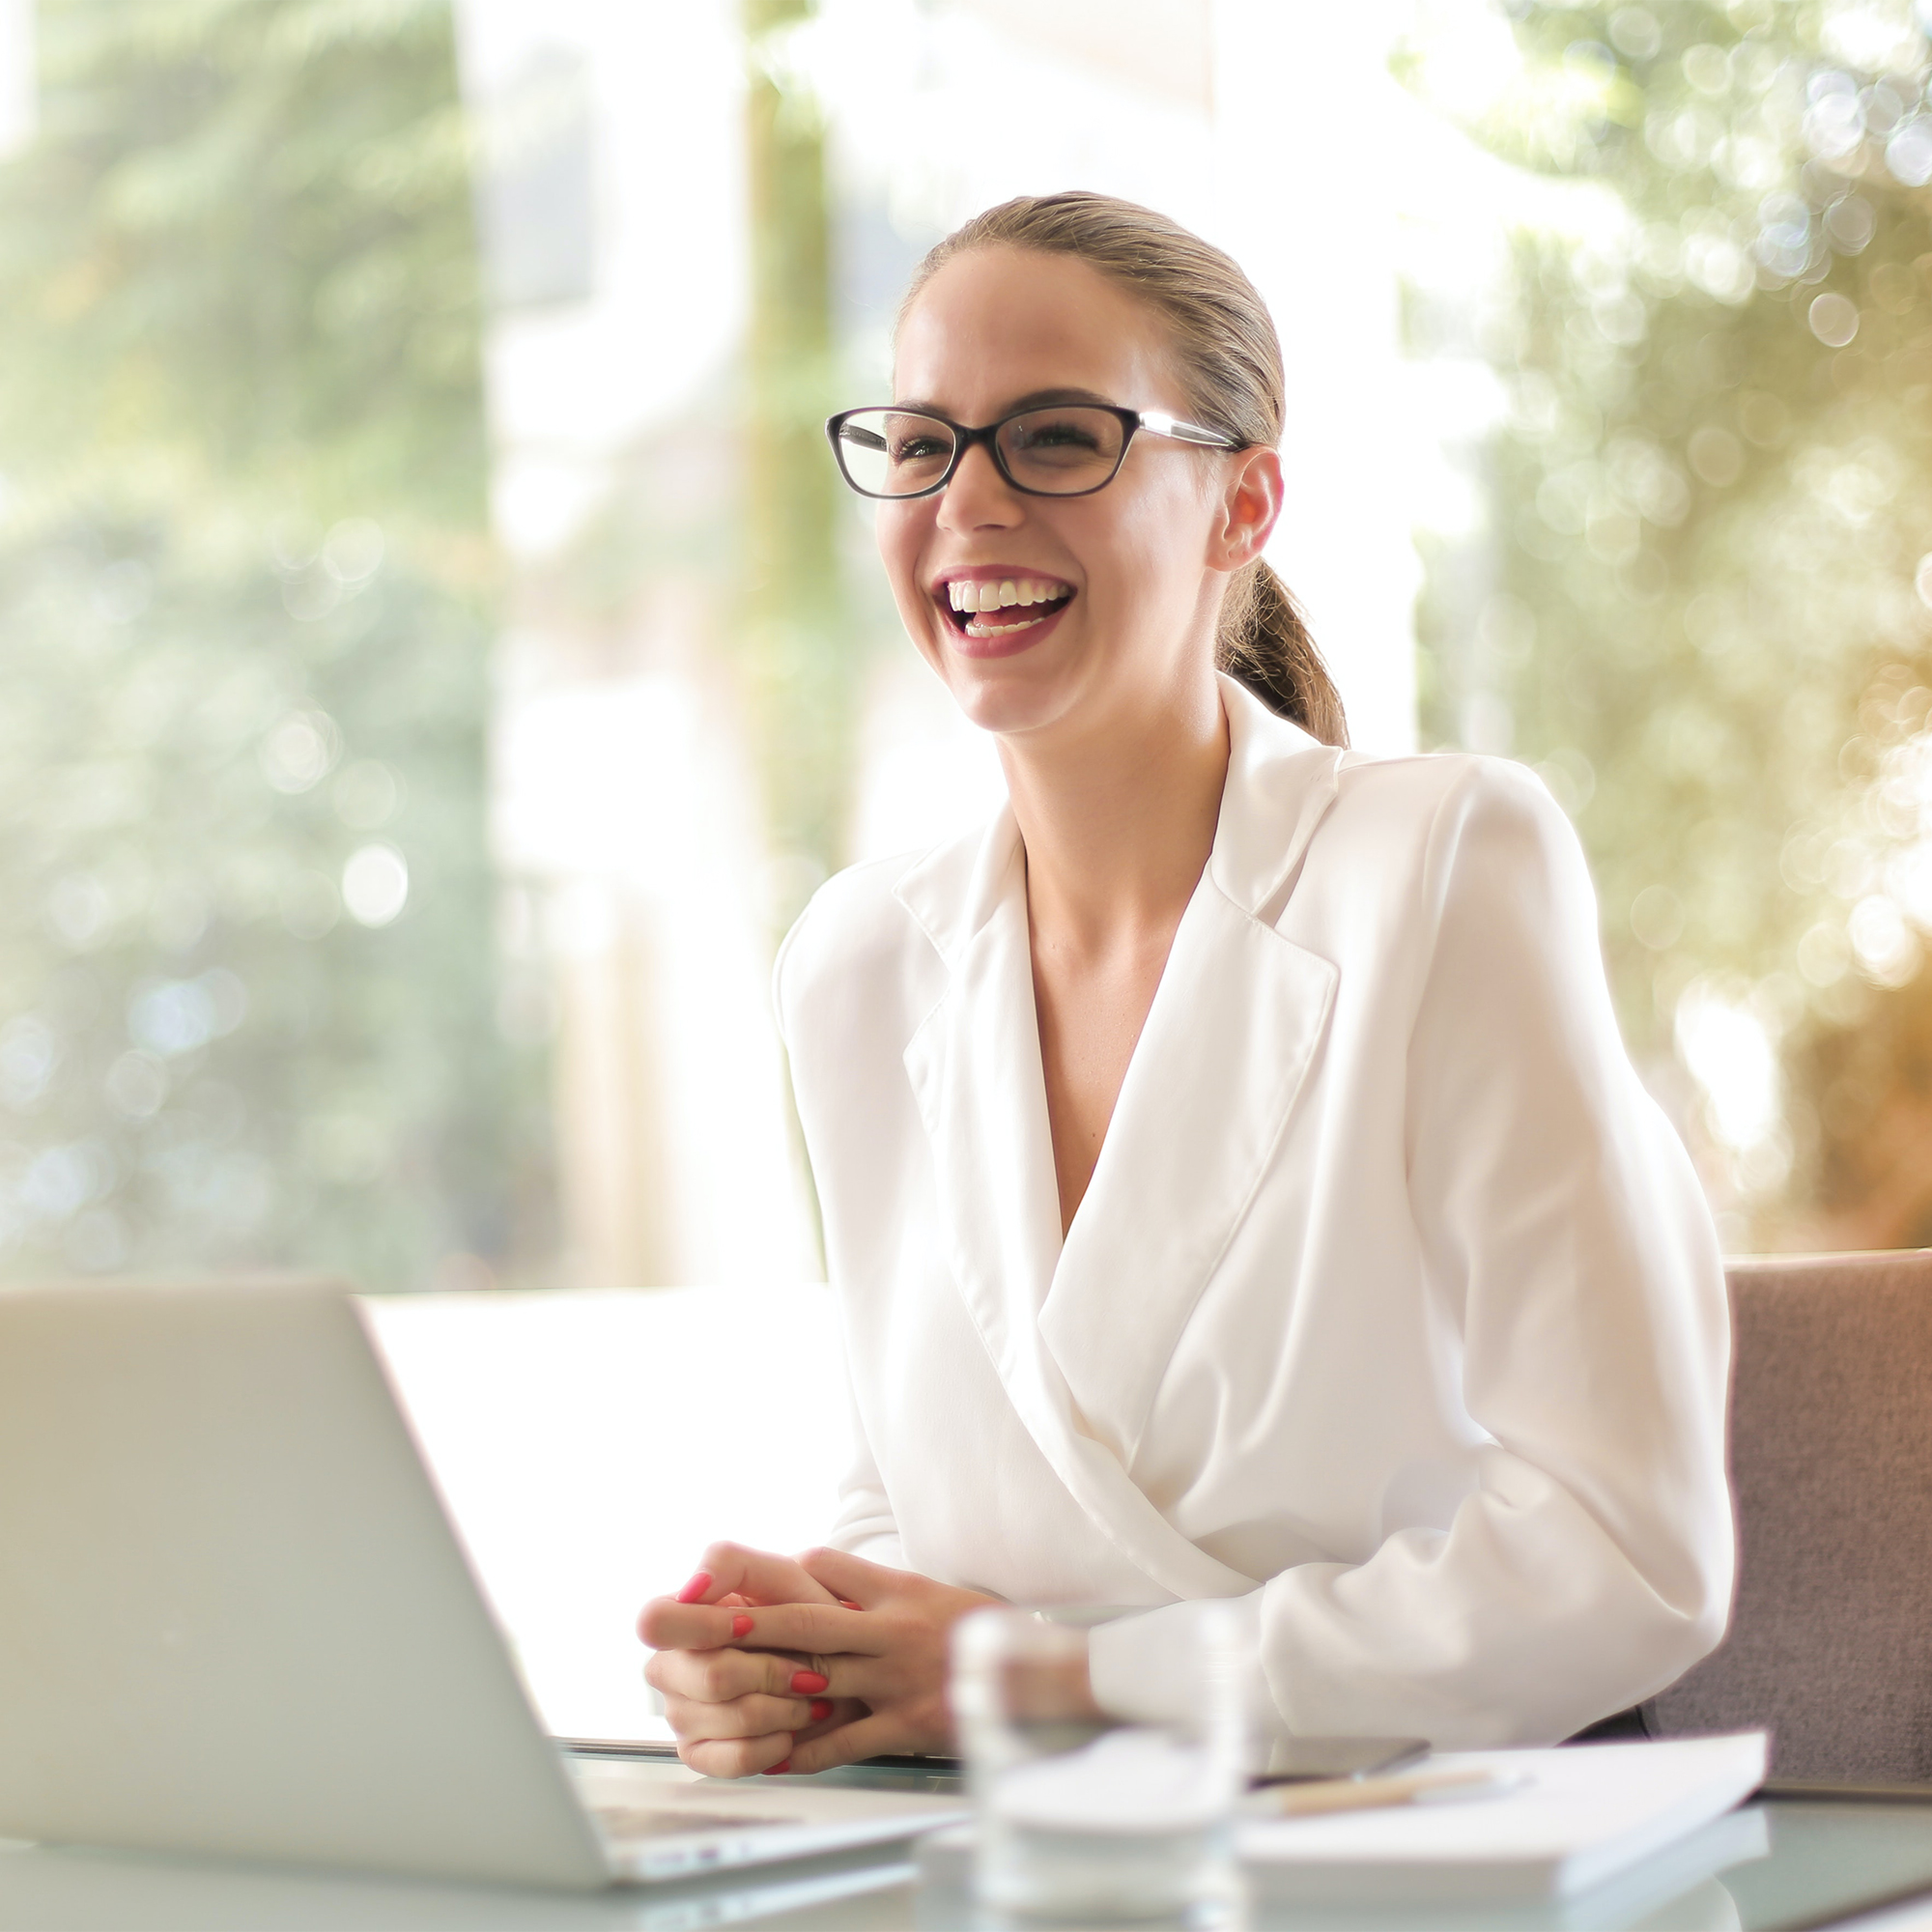 Happy Woman smiling at her computer, business professional